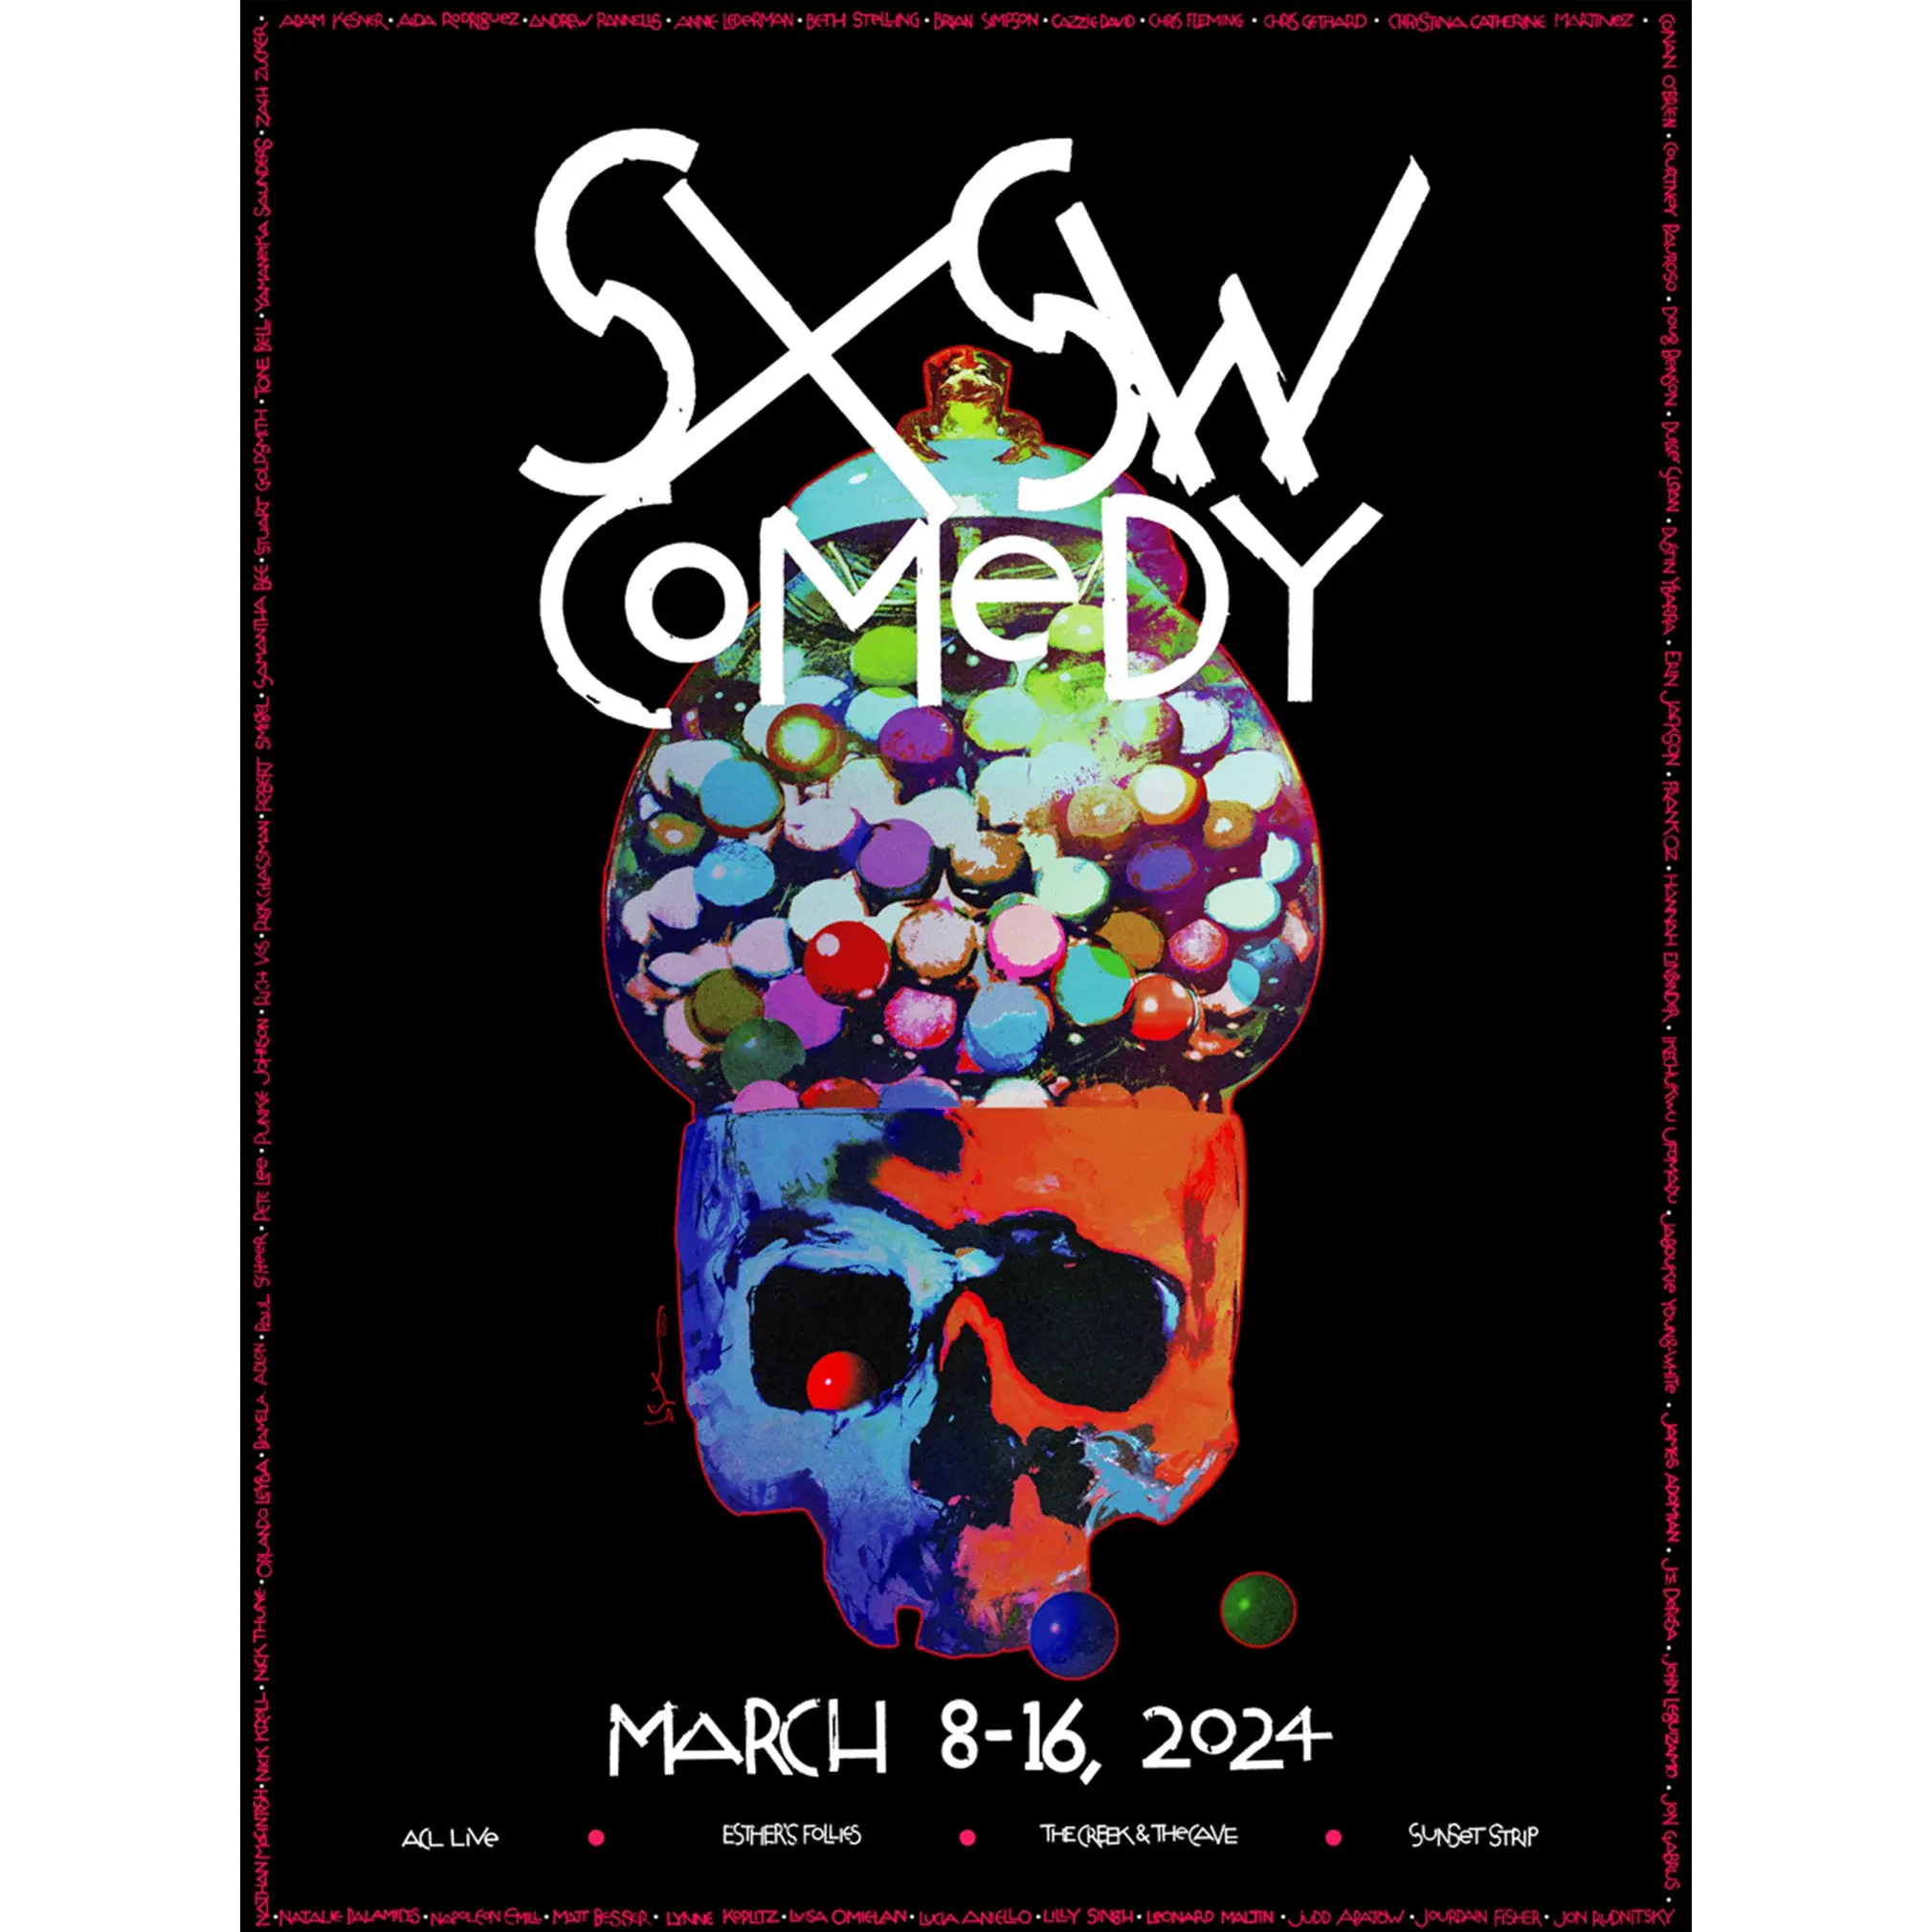 Official 2024 SXSW Comedy Festival Poster – designed by Bill Sienkiewicz